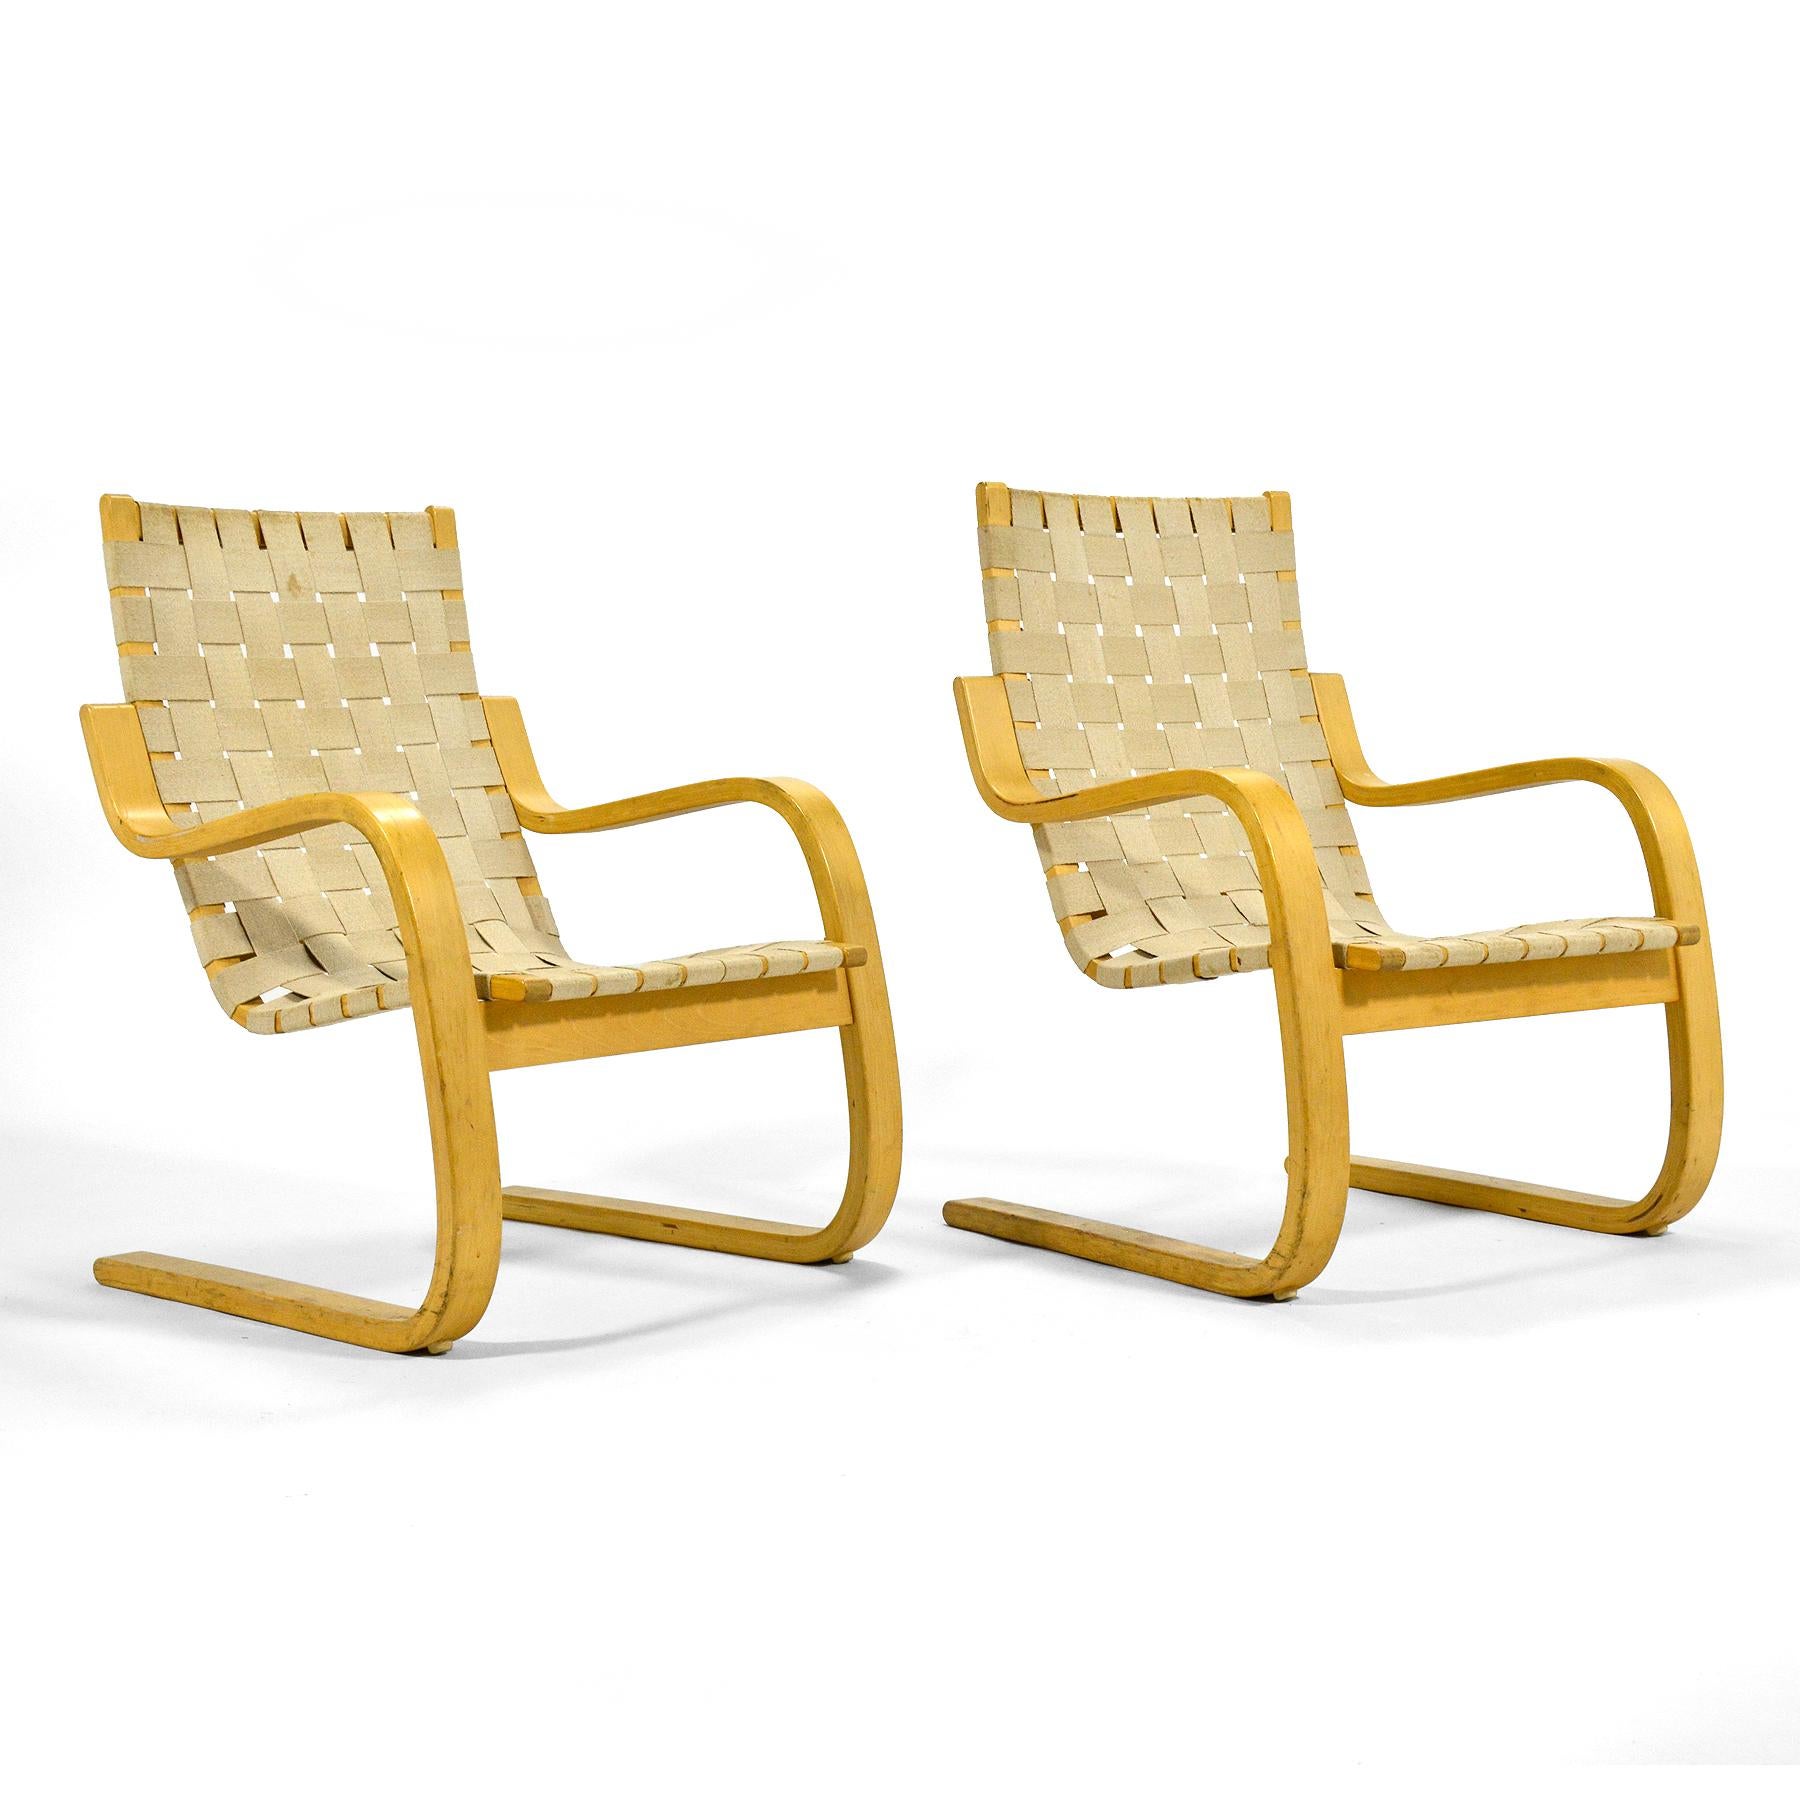 Aalto's 1936 design, the model 406 lounge chair is a perfect example of understated Finnish design. The bent wood cantelivered frame of laminated birch and natural cotton webbing supports the sitter in comfort. This pair of vintage chairs have a